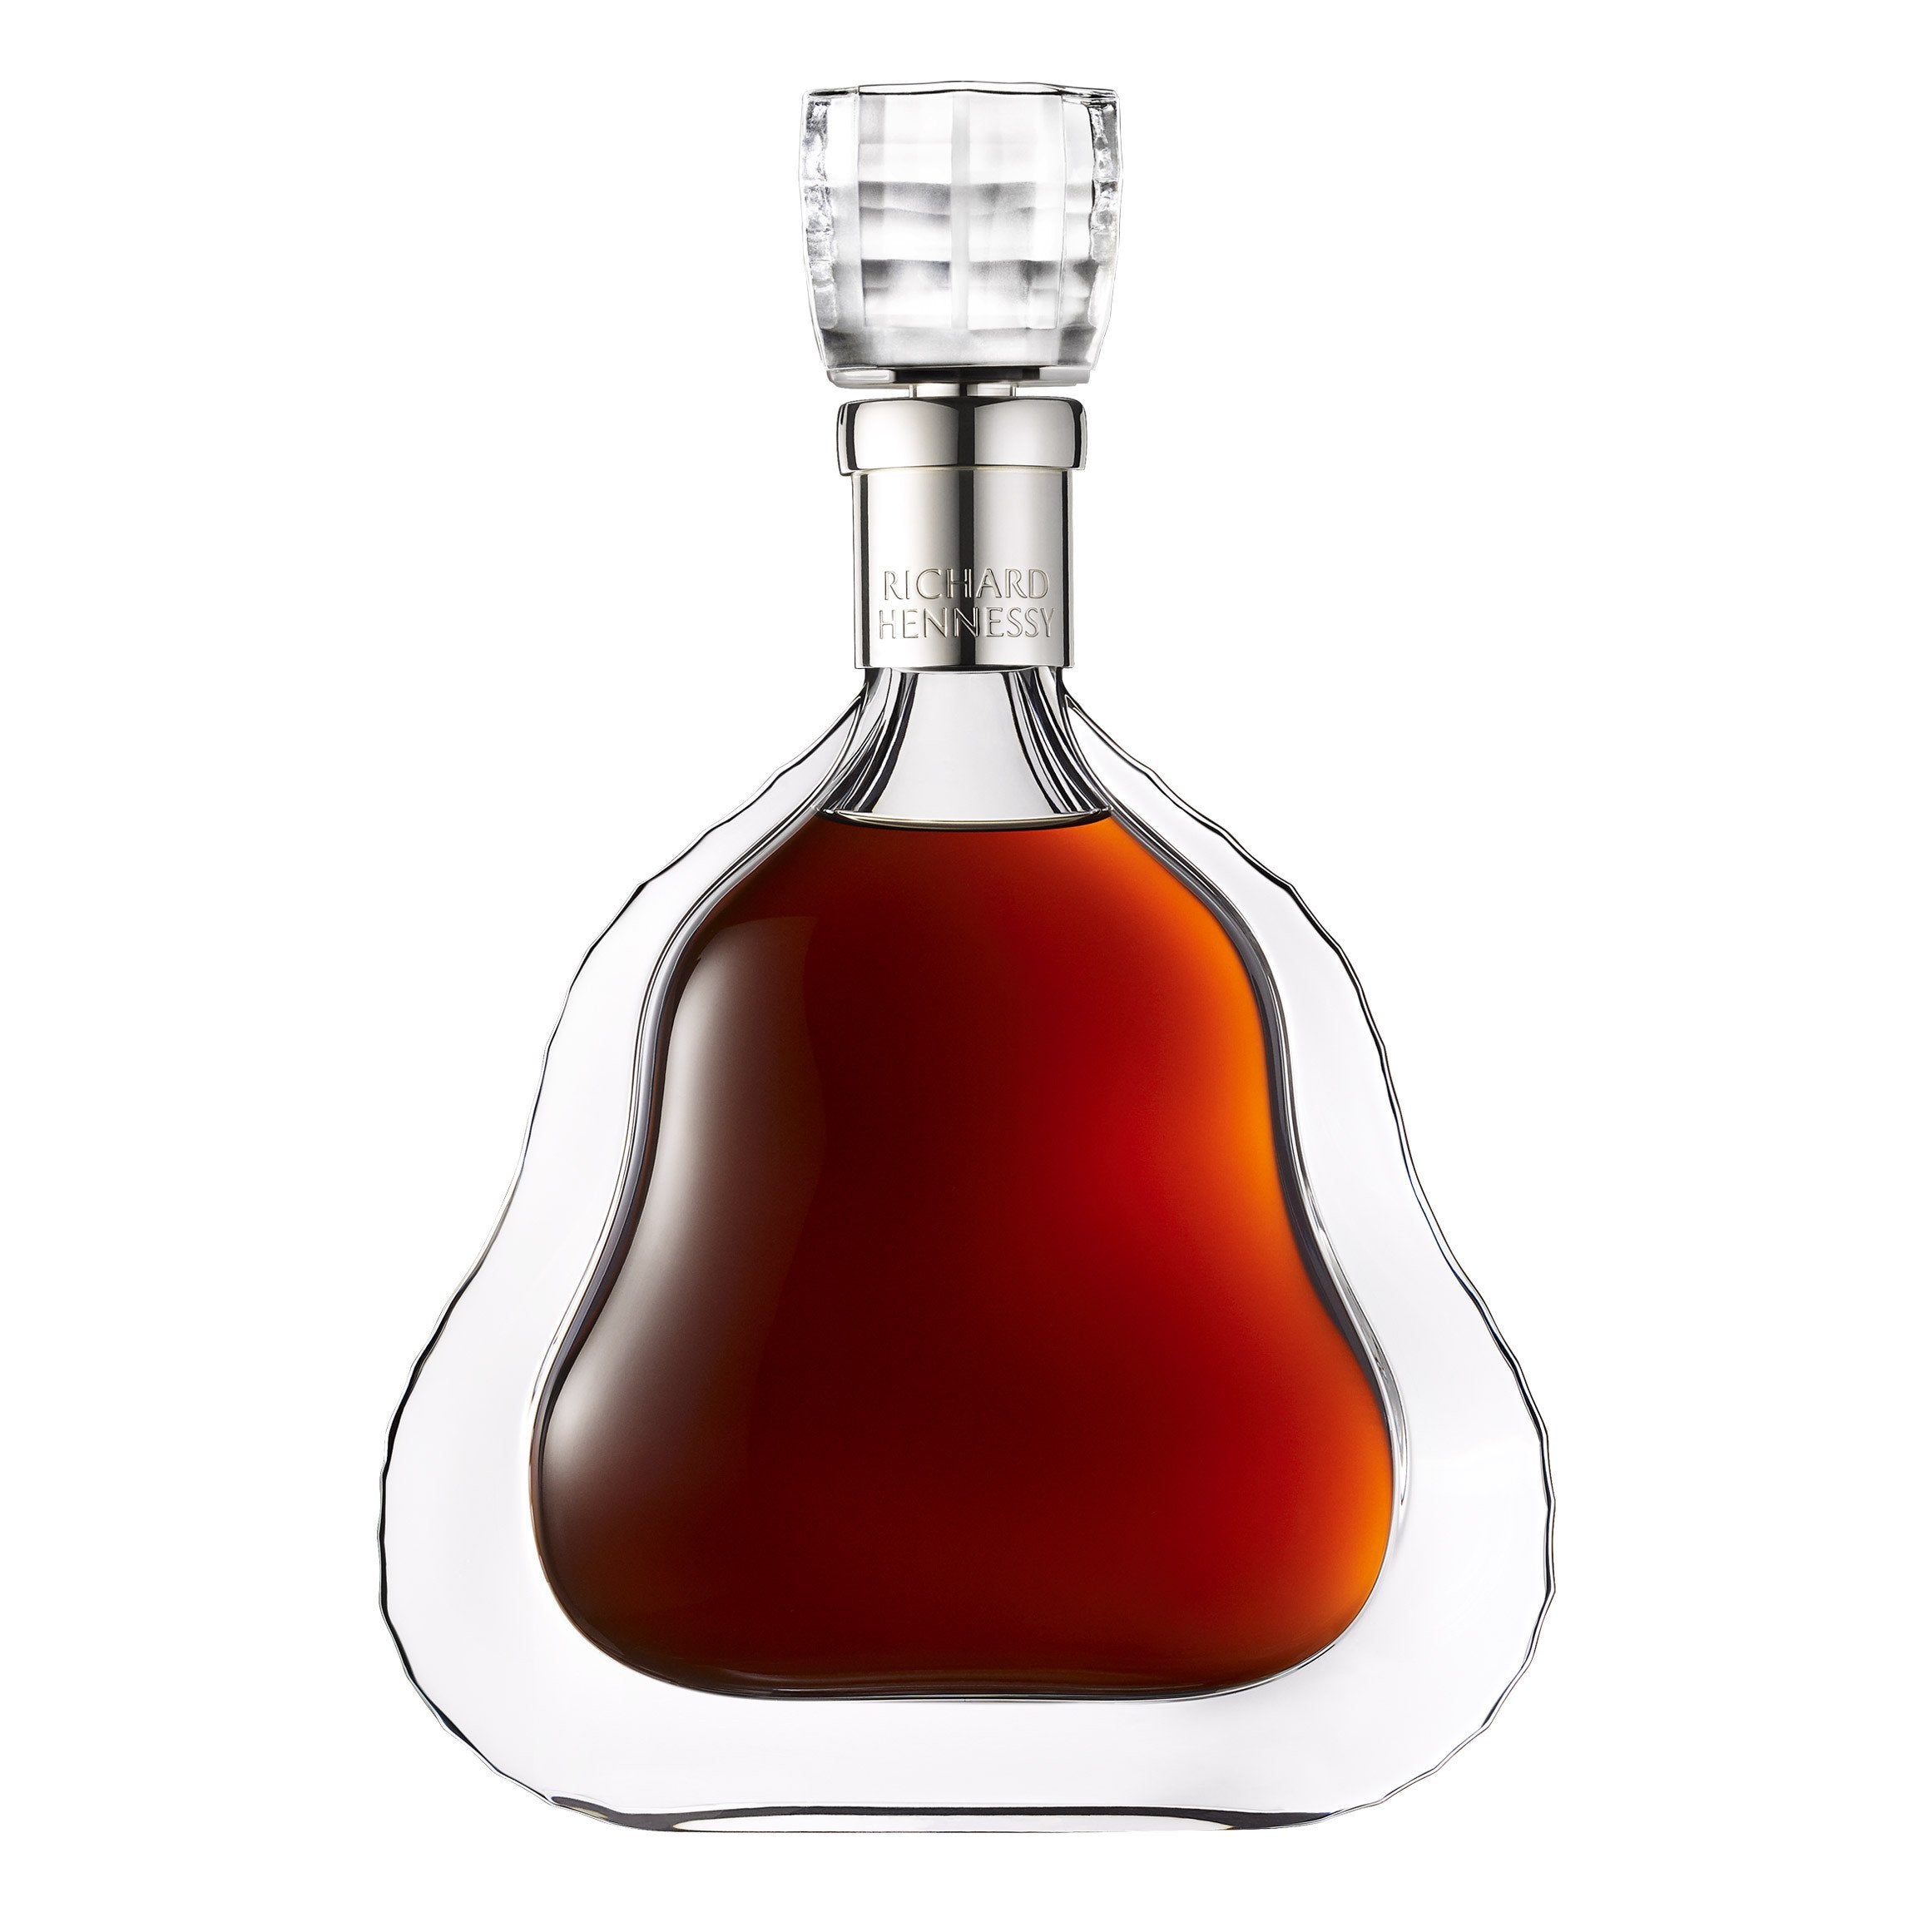 Hennessy Richard (pre 2022) ABV 40% 70cl with Gift Box - The 